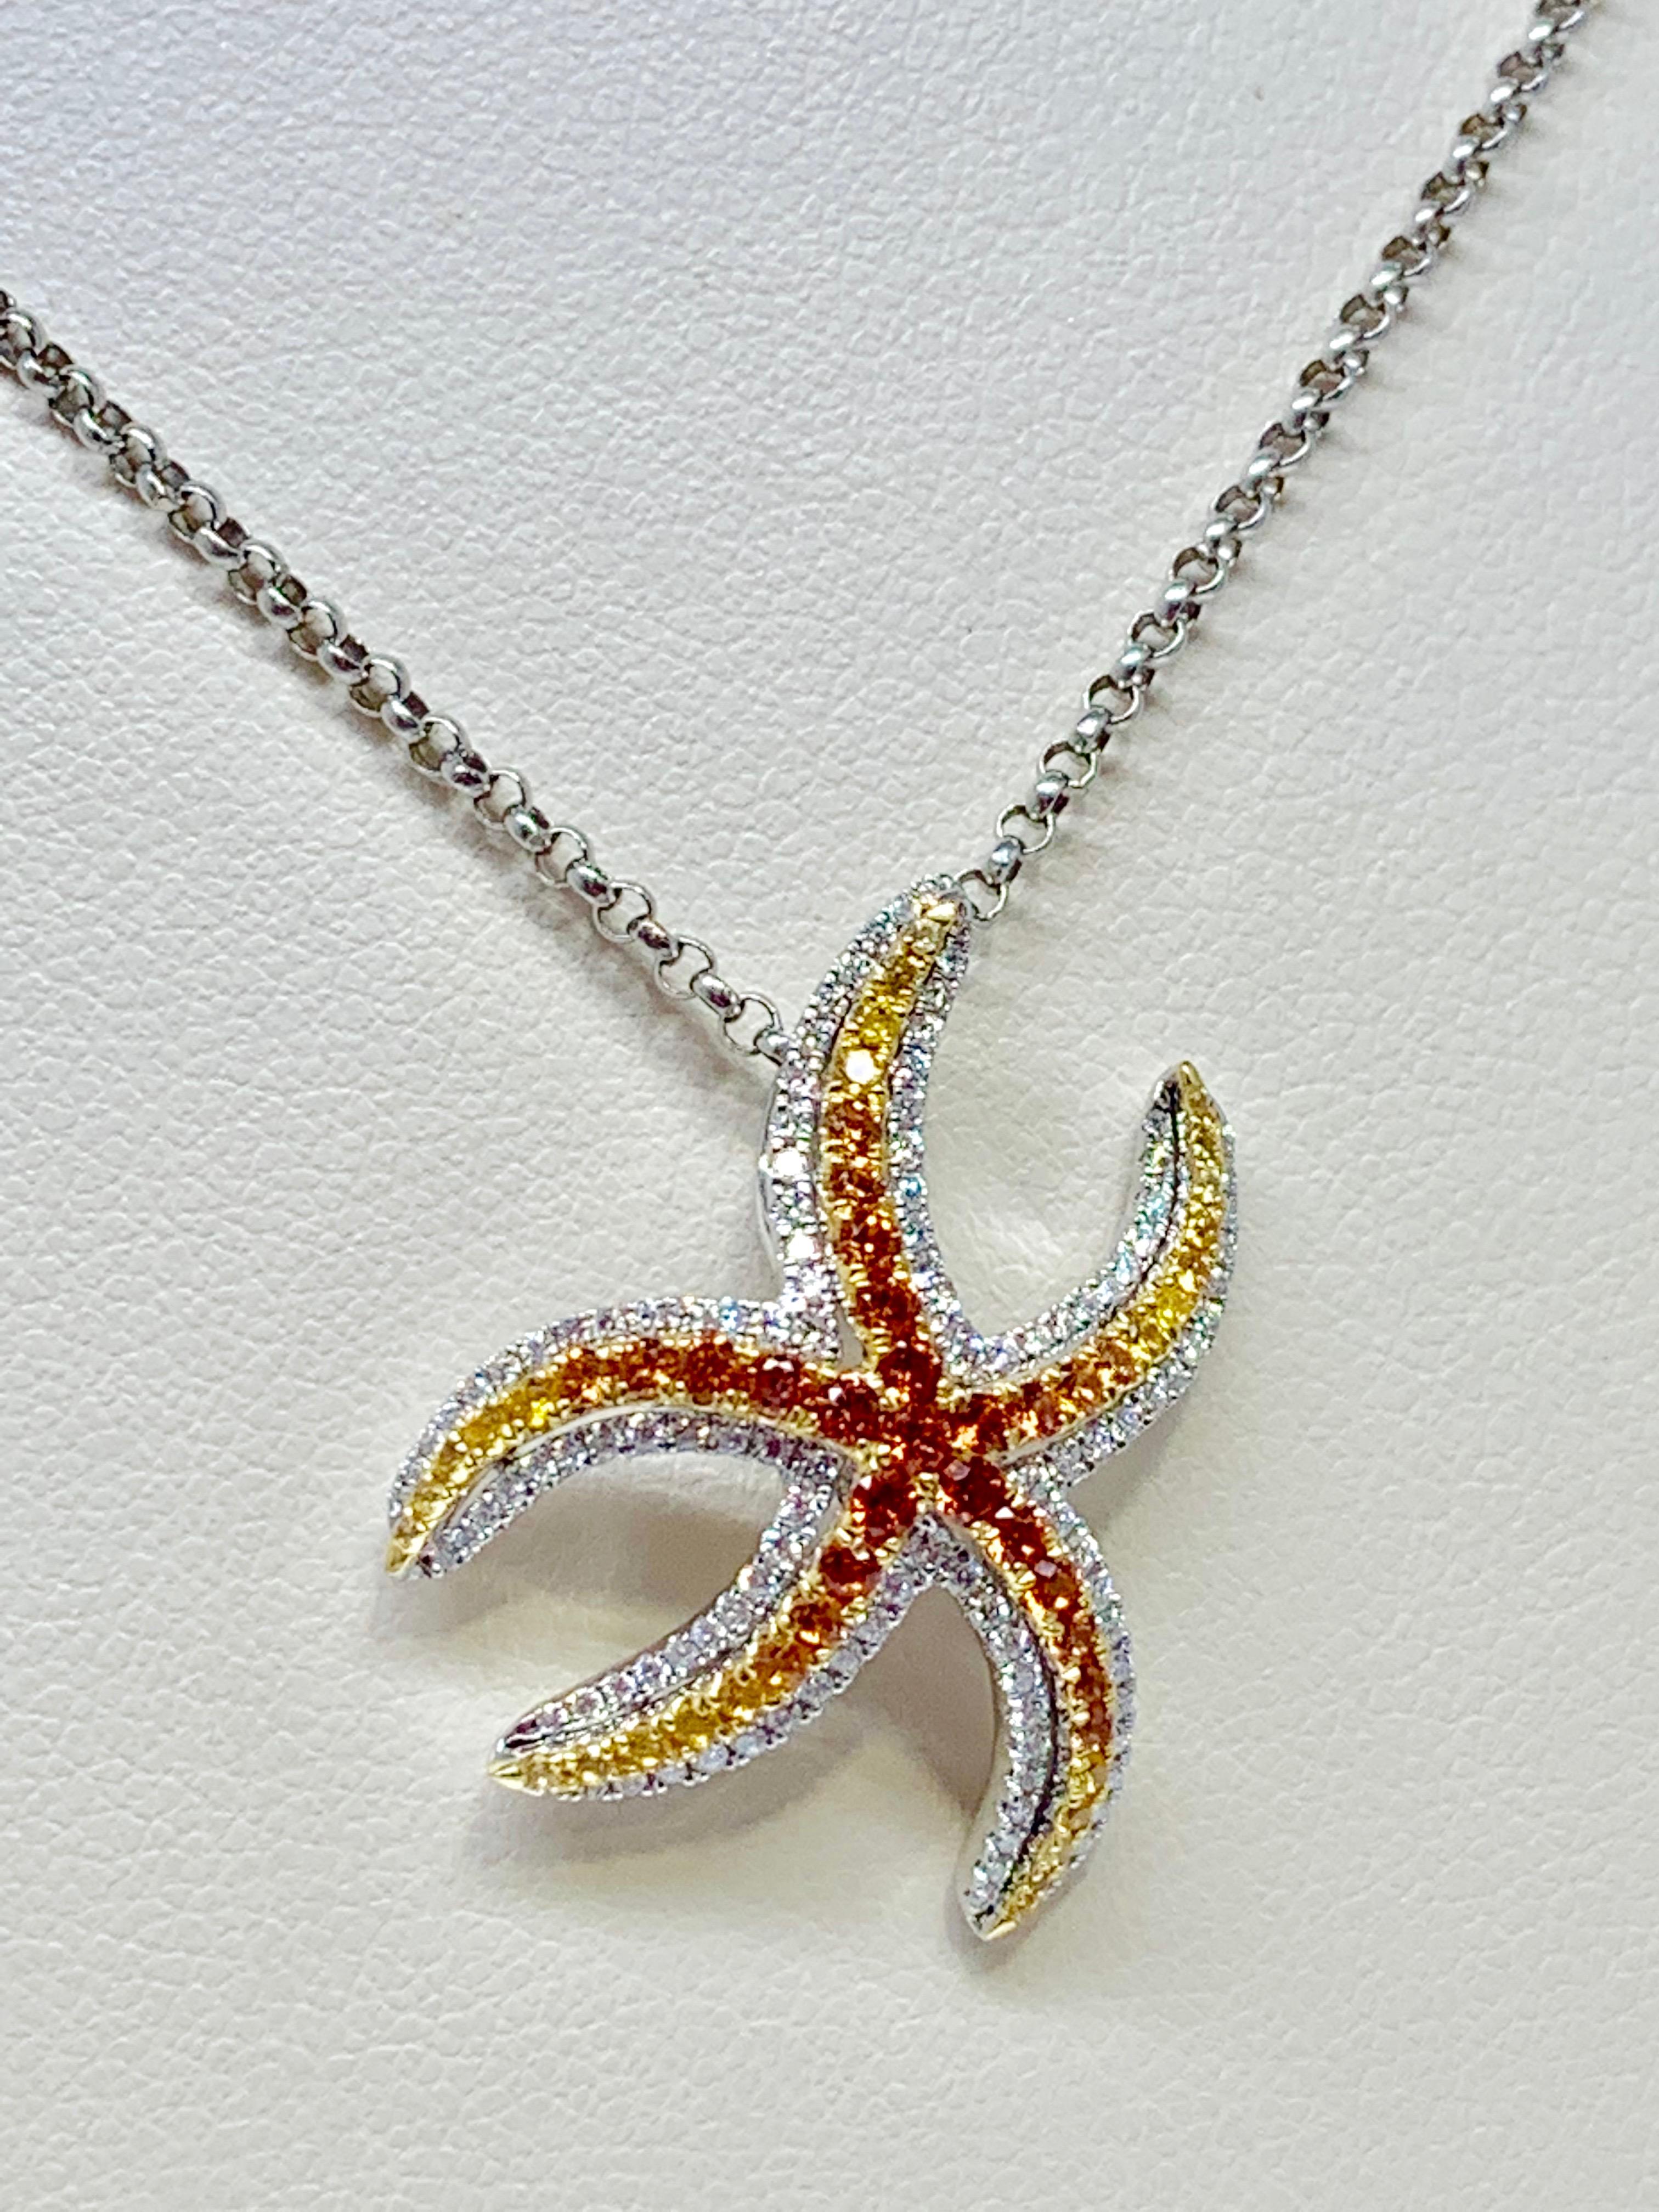 This vibrant 14K white gold starfish necklace features 0.52 carats of round yellow and orange sapphires as well as 0.38 carats of round white diamonds. This necklace includes a 14K white gold 18